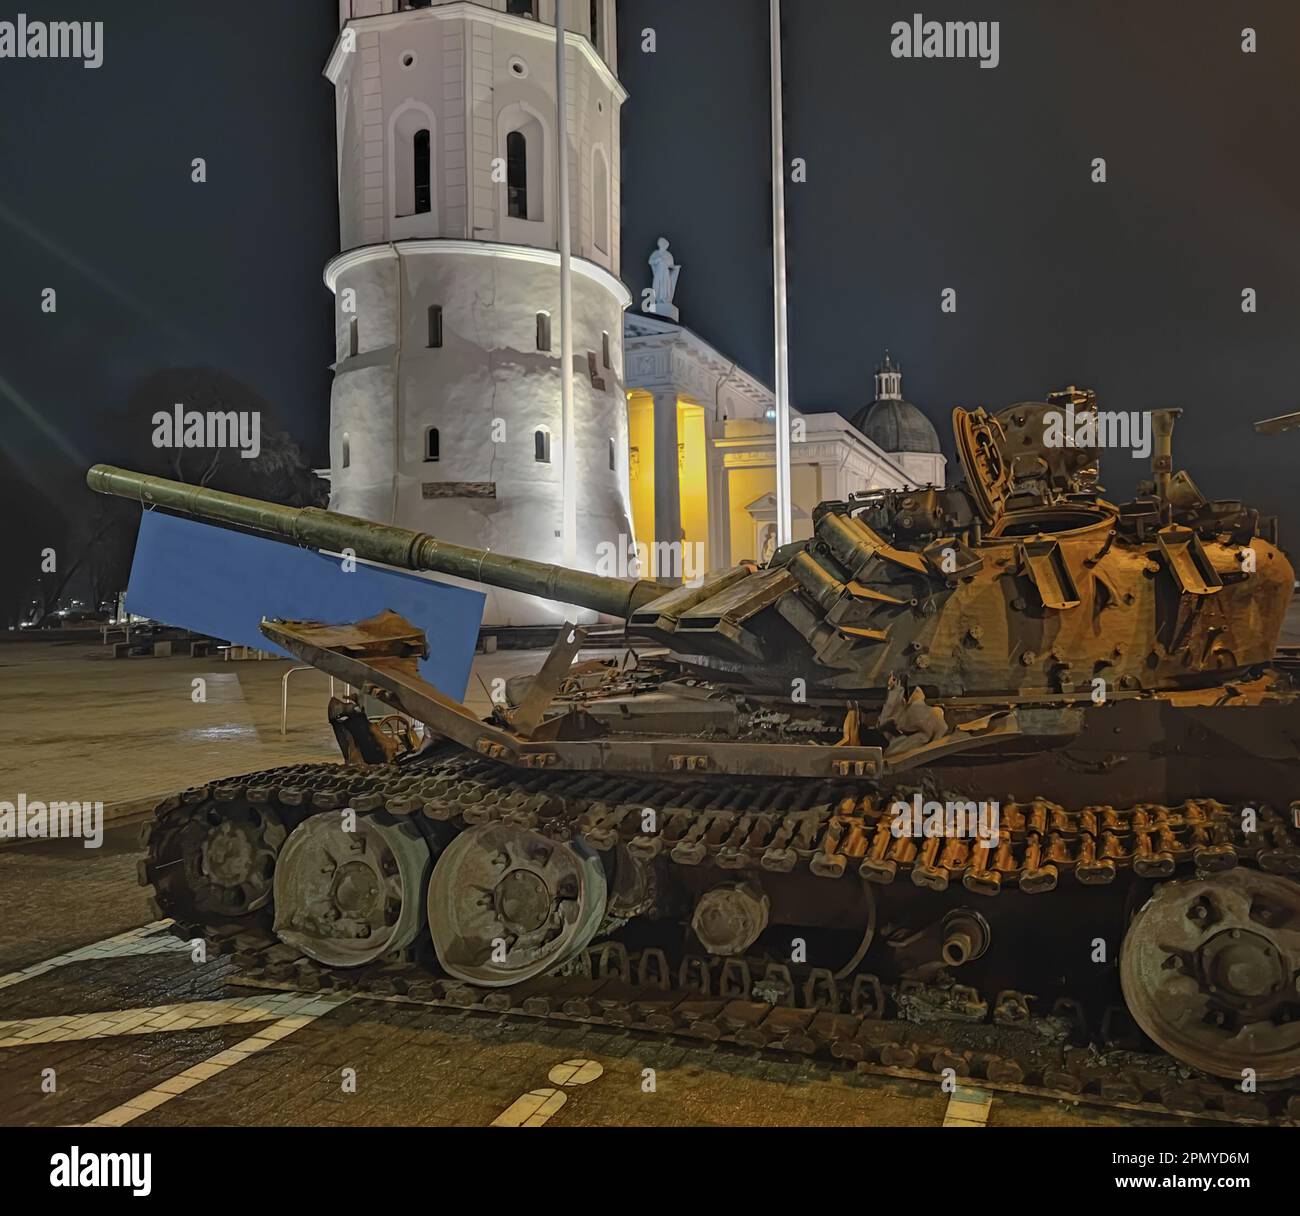 A destroyed Russian tank standing at night in the old town of Vilnius. Battle tank destroyed during hostilities in Russian invasion of Ukraine, 2022 Stock Photo